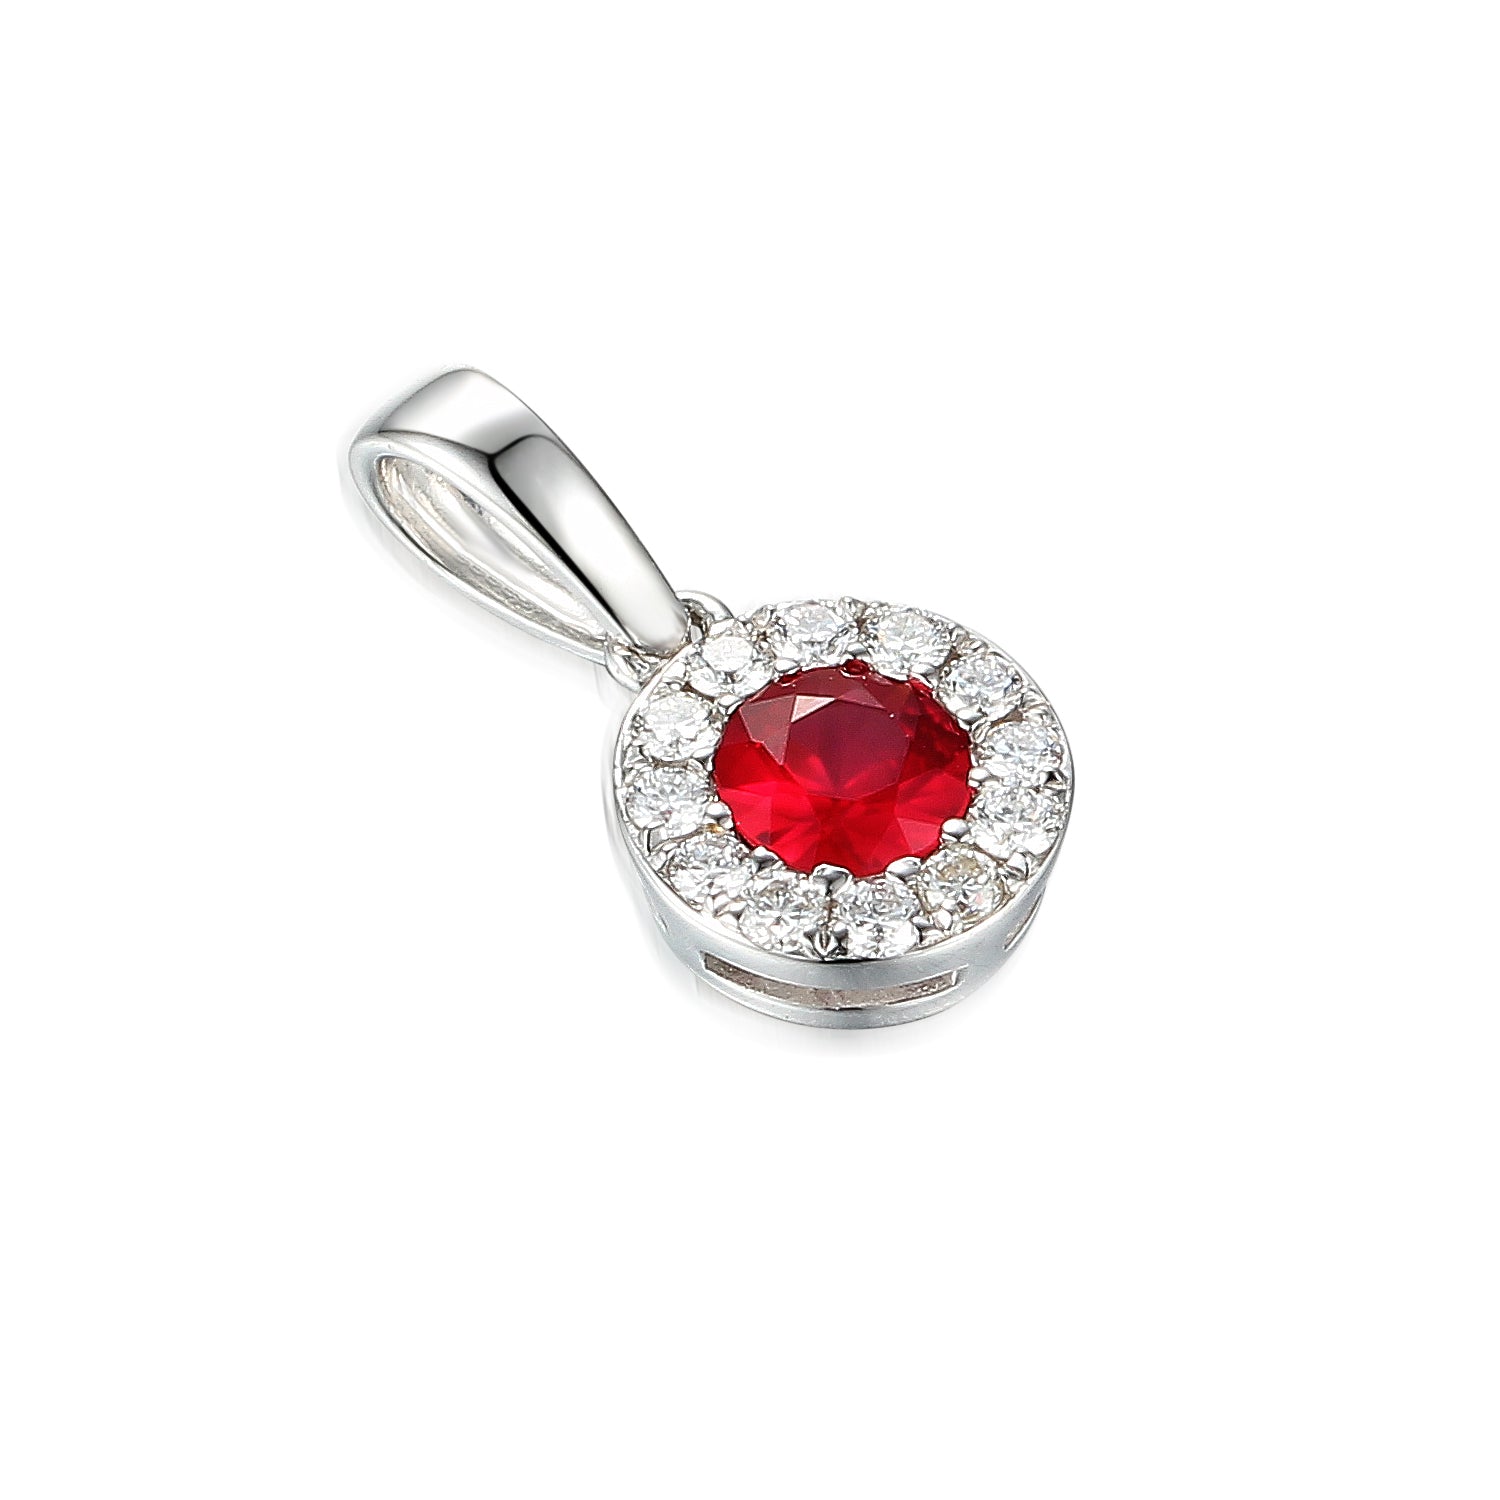 July Birthstone Ruby and Diamond Cluster 9ct Pendant Gold